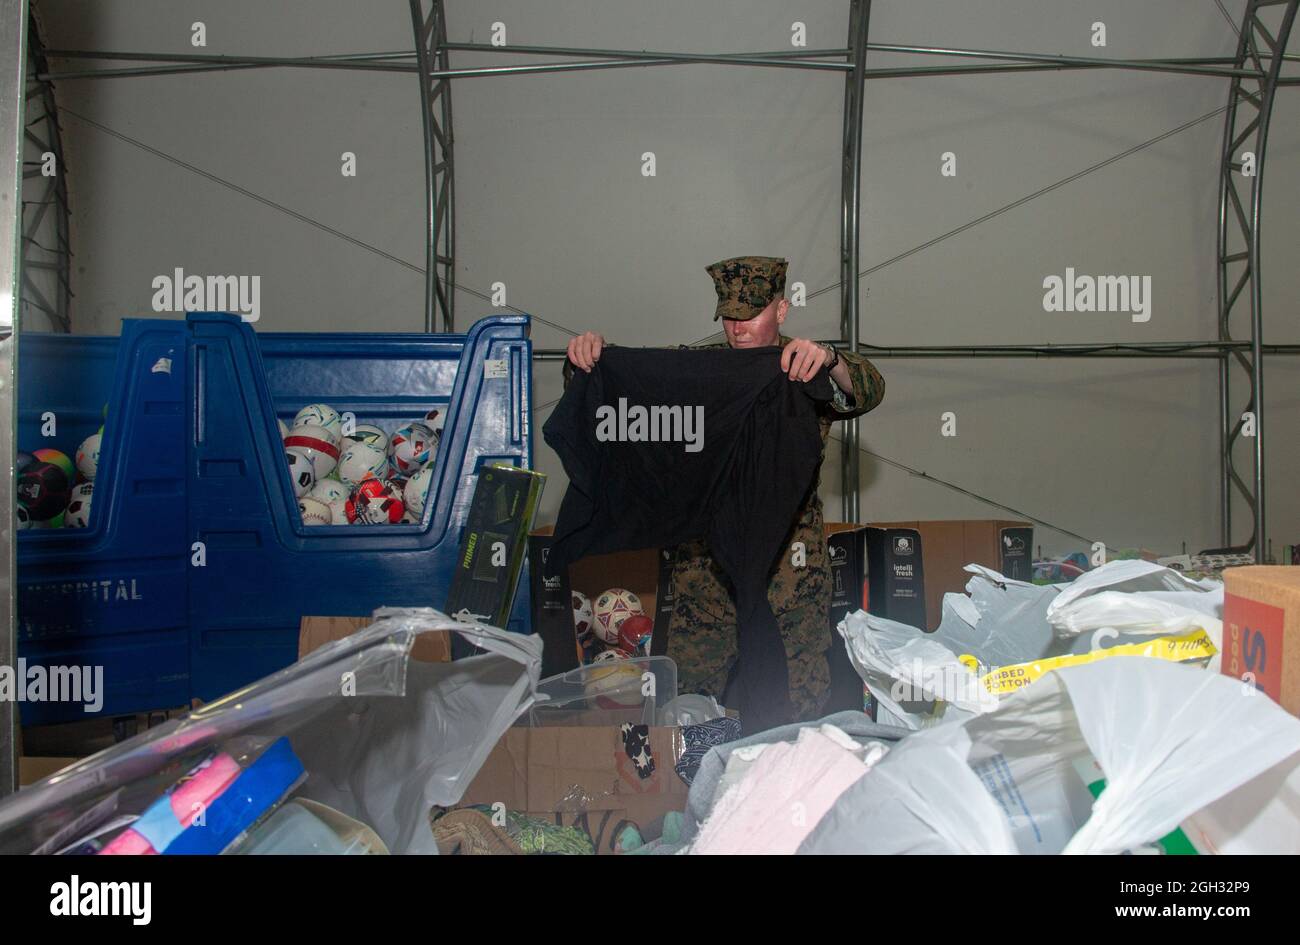 U.S. Marine Corps Maj. Taylor Reeves with Combat Logistic Regiment 2, a Portland, Oregon native, helps move various items donated by the Muslim Association of Virginia, Masjid Noor on Marine Corps Base Quantico, Virginia, Sept. 1, 2021. The Department of Defense, through U.S. Northern Command, and in support of the Department of Homeland Security, is providing transportation, temporary housing, medical screening, and general support for at least 50,000 Afghan evacuees at suitable facilities, in permanent or temporary structures, as quickly as possible. This initiative provides Afghan personnel Stock Photo